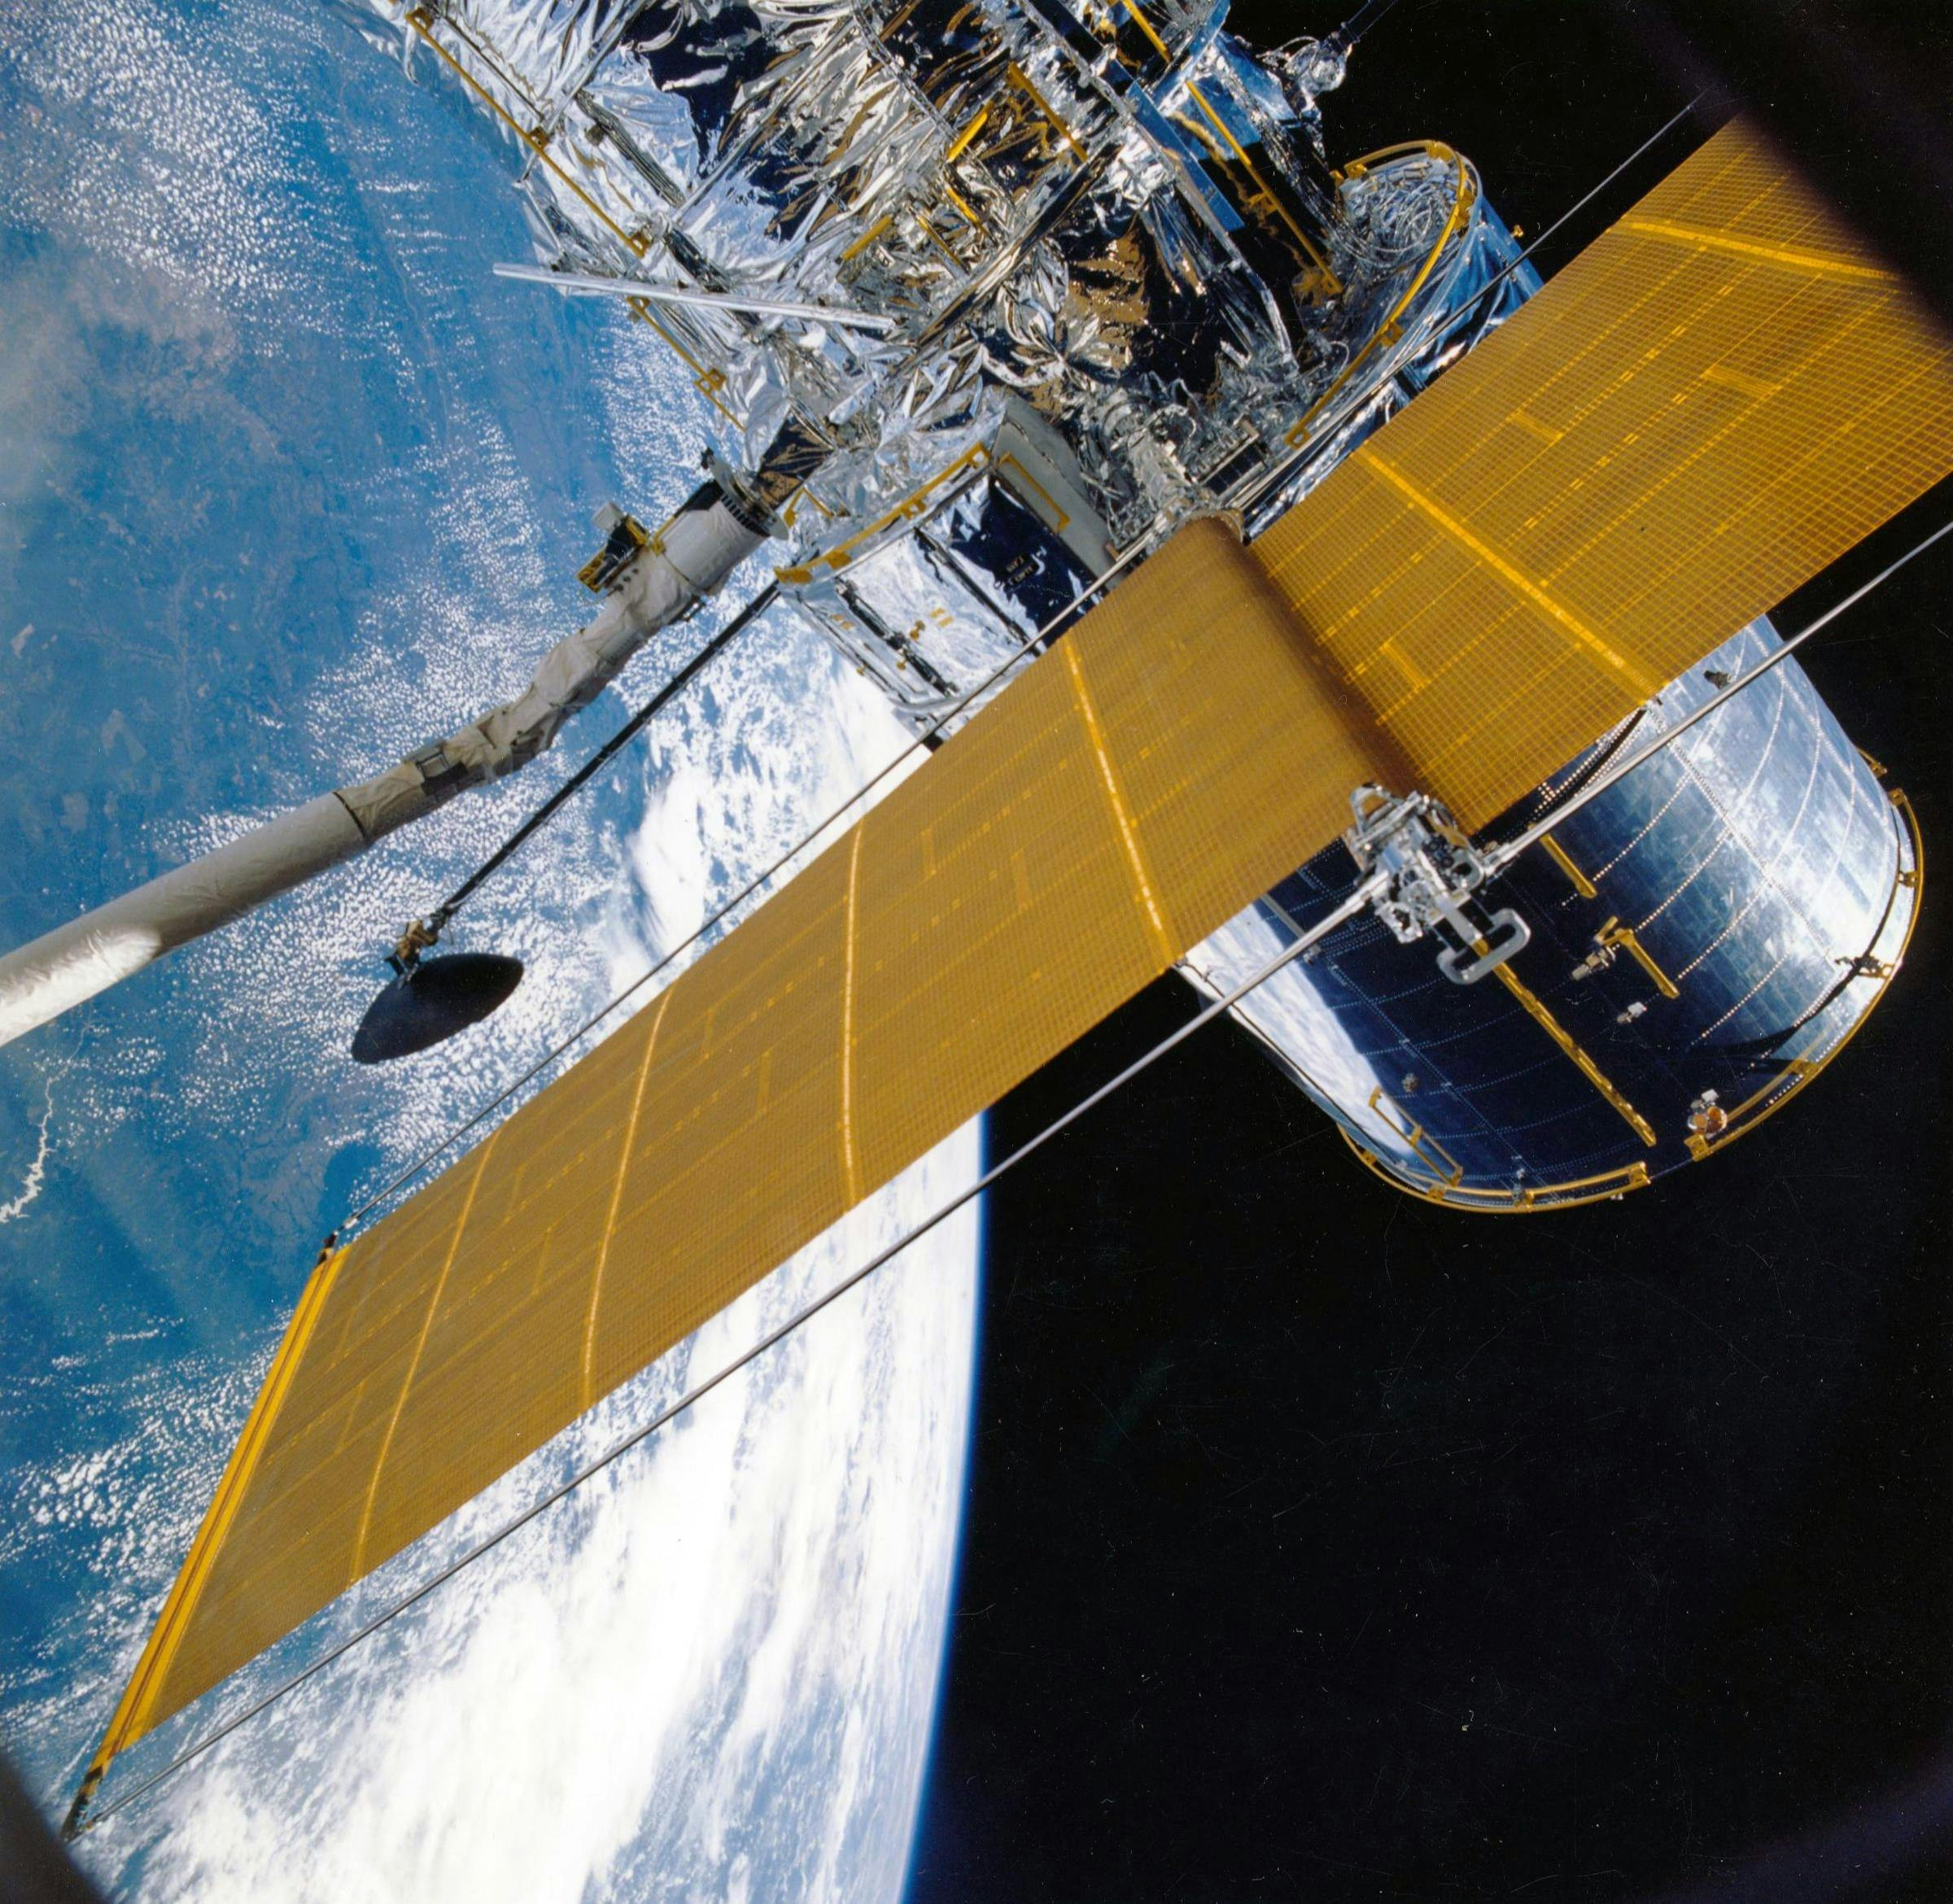 spacecraft in space